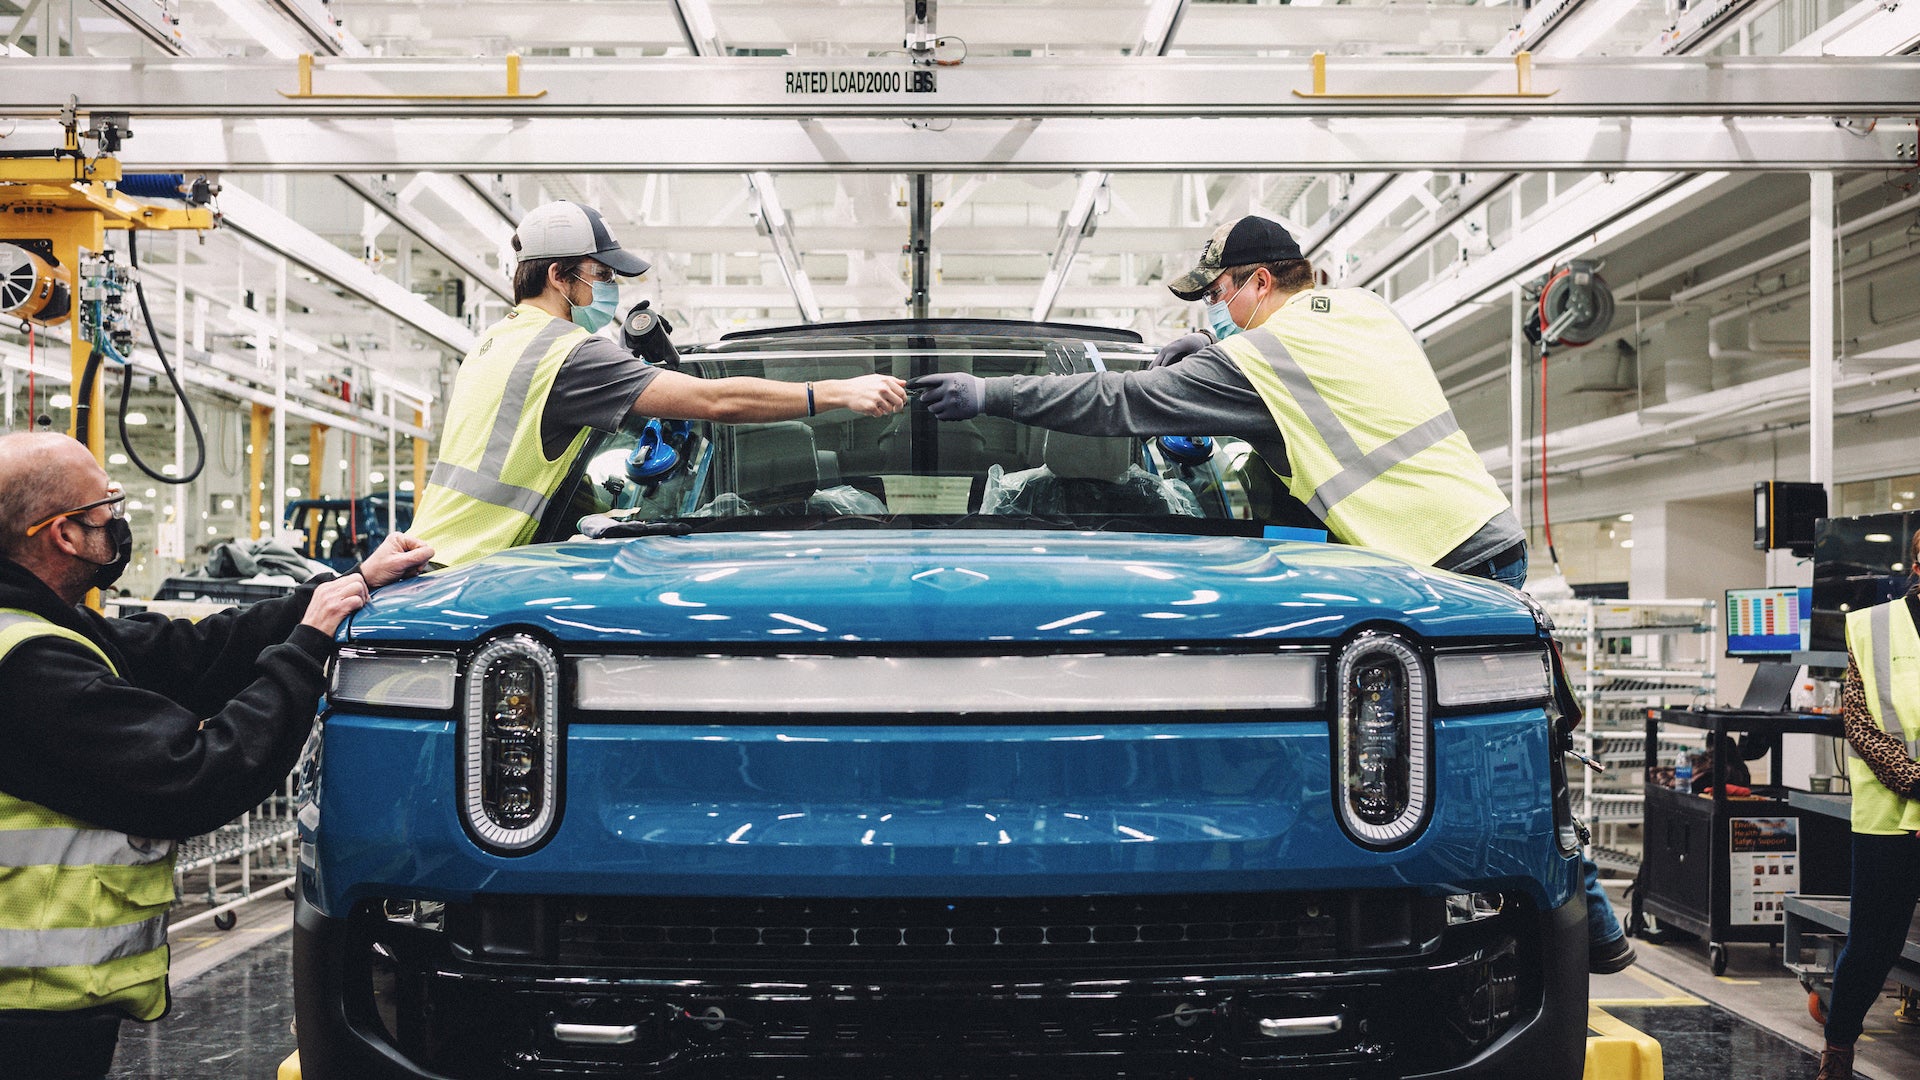 Pre-Ordered a Rivian? You May Get It in 2023 Now